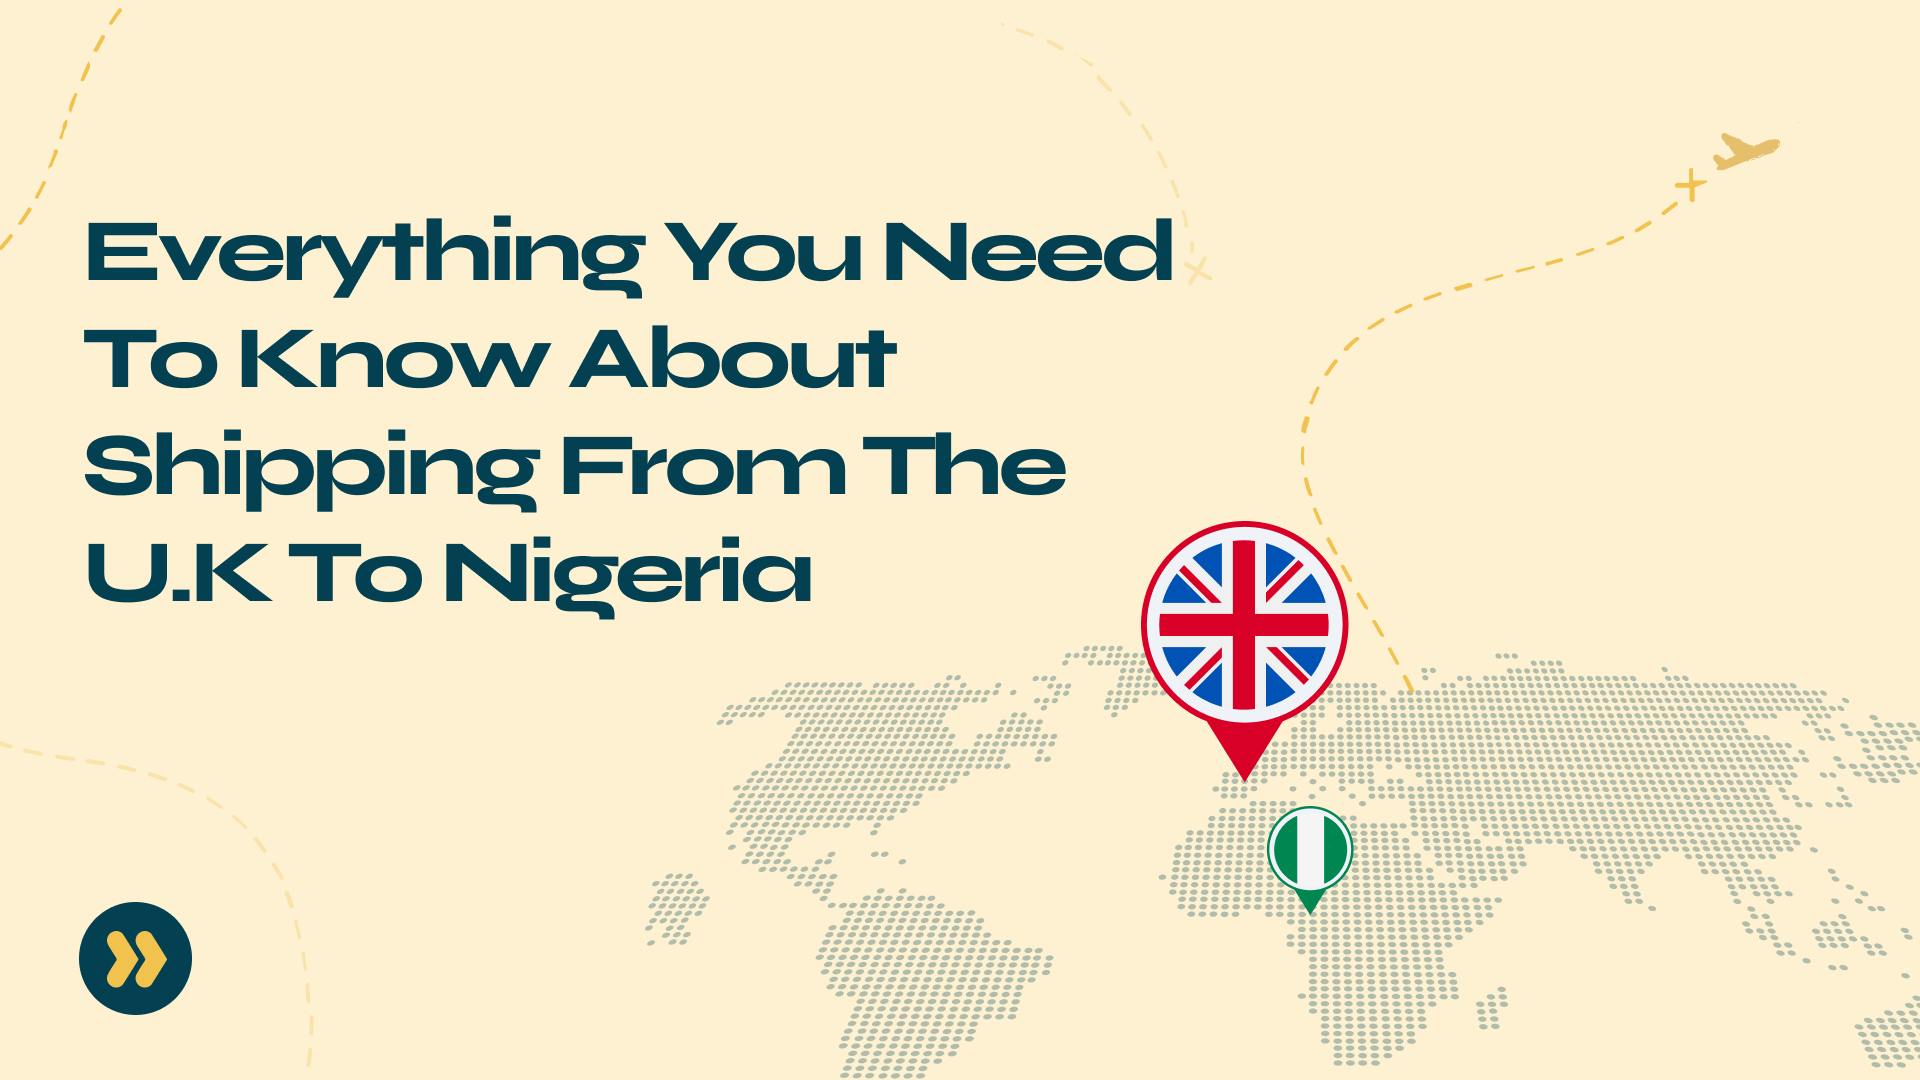 Everything You Need To Know About Shipping From The U.K. To Nigeria